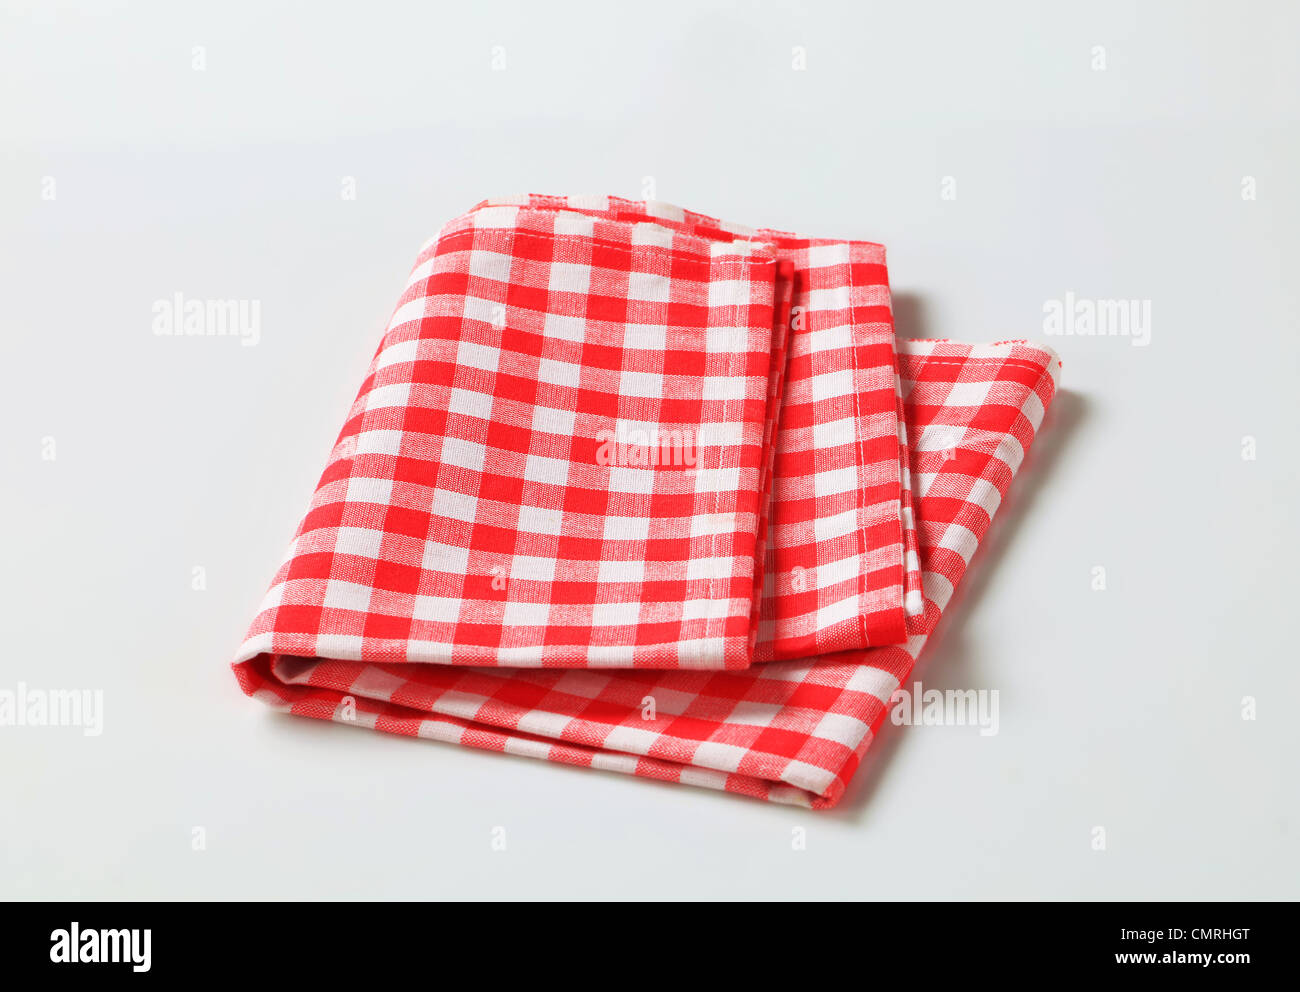 Red and white checked table linen Stock Photo